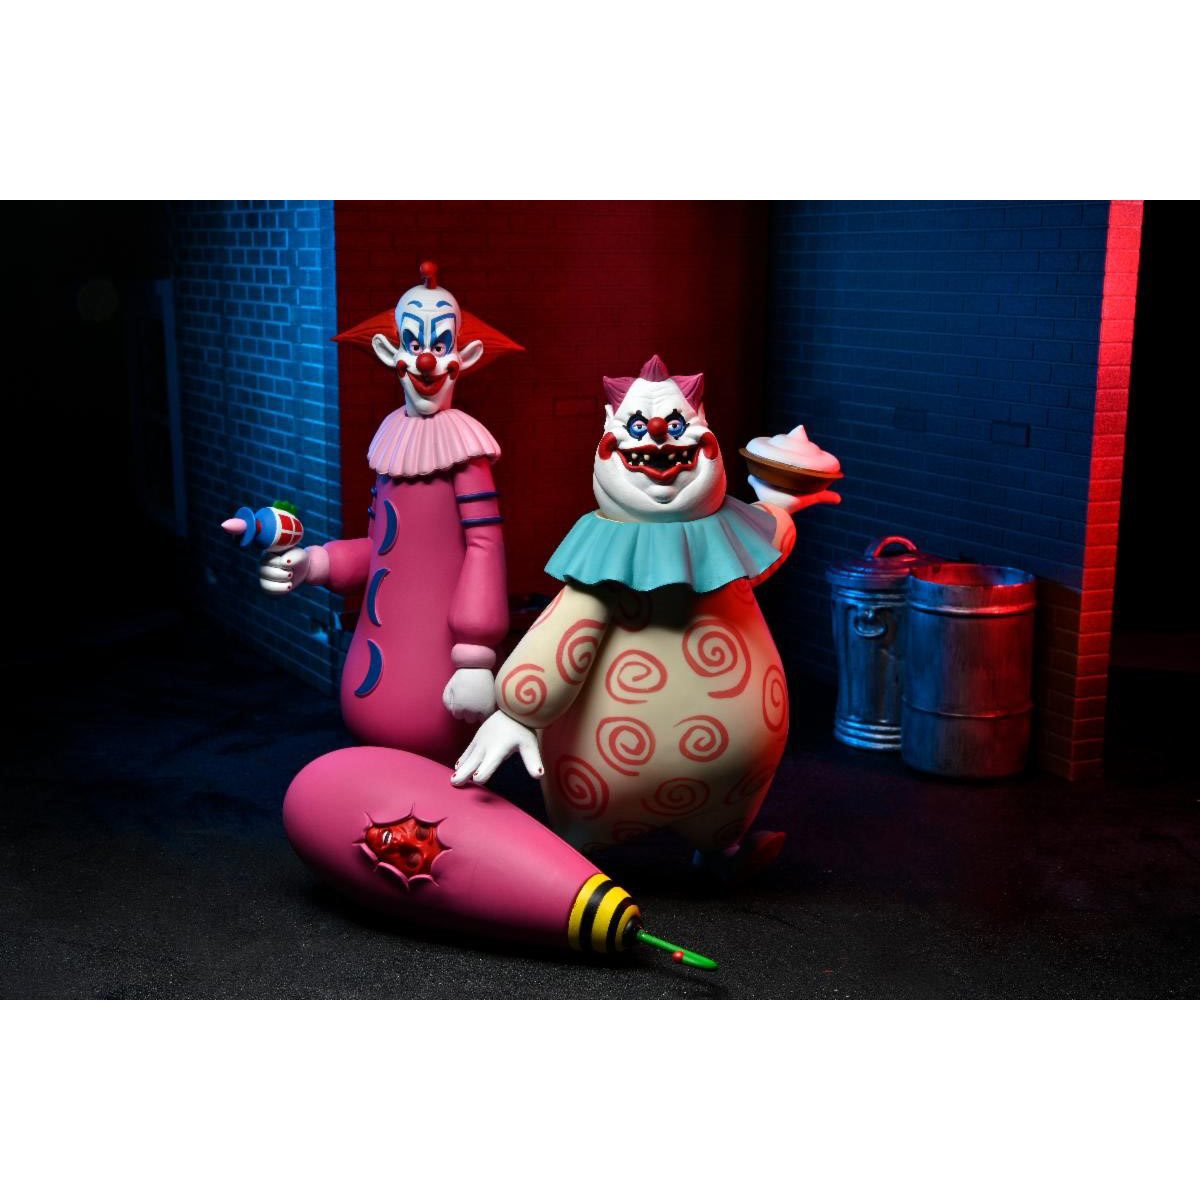 NECA - Toony Terrors Slim & Jumbo (Killer Klowns From Outer Space) 6" Action Figure 2-Pack